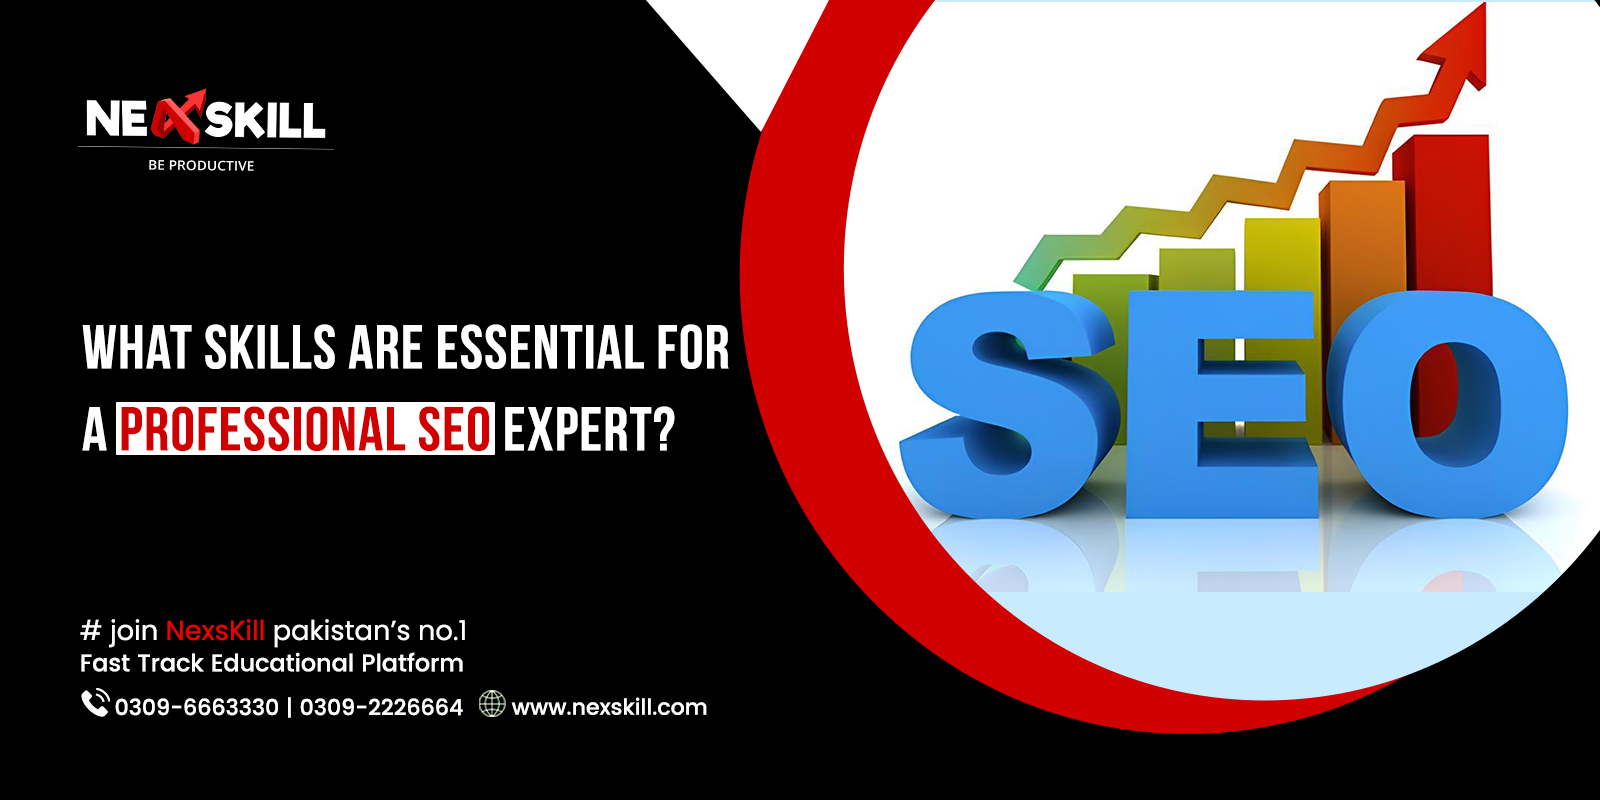 What Skills are Essential for a Professional SEO Expert?